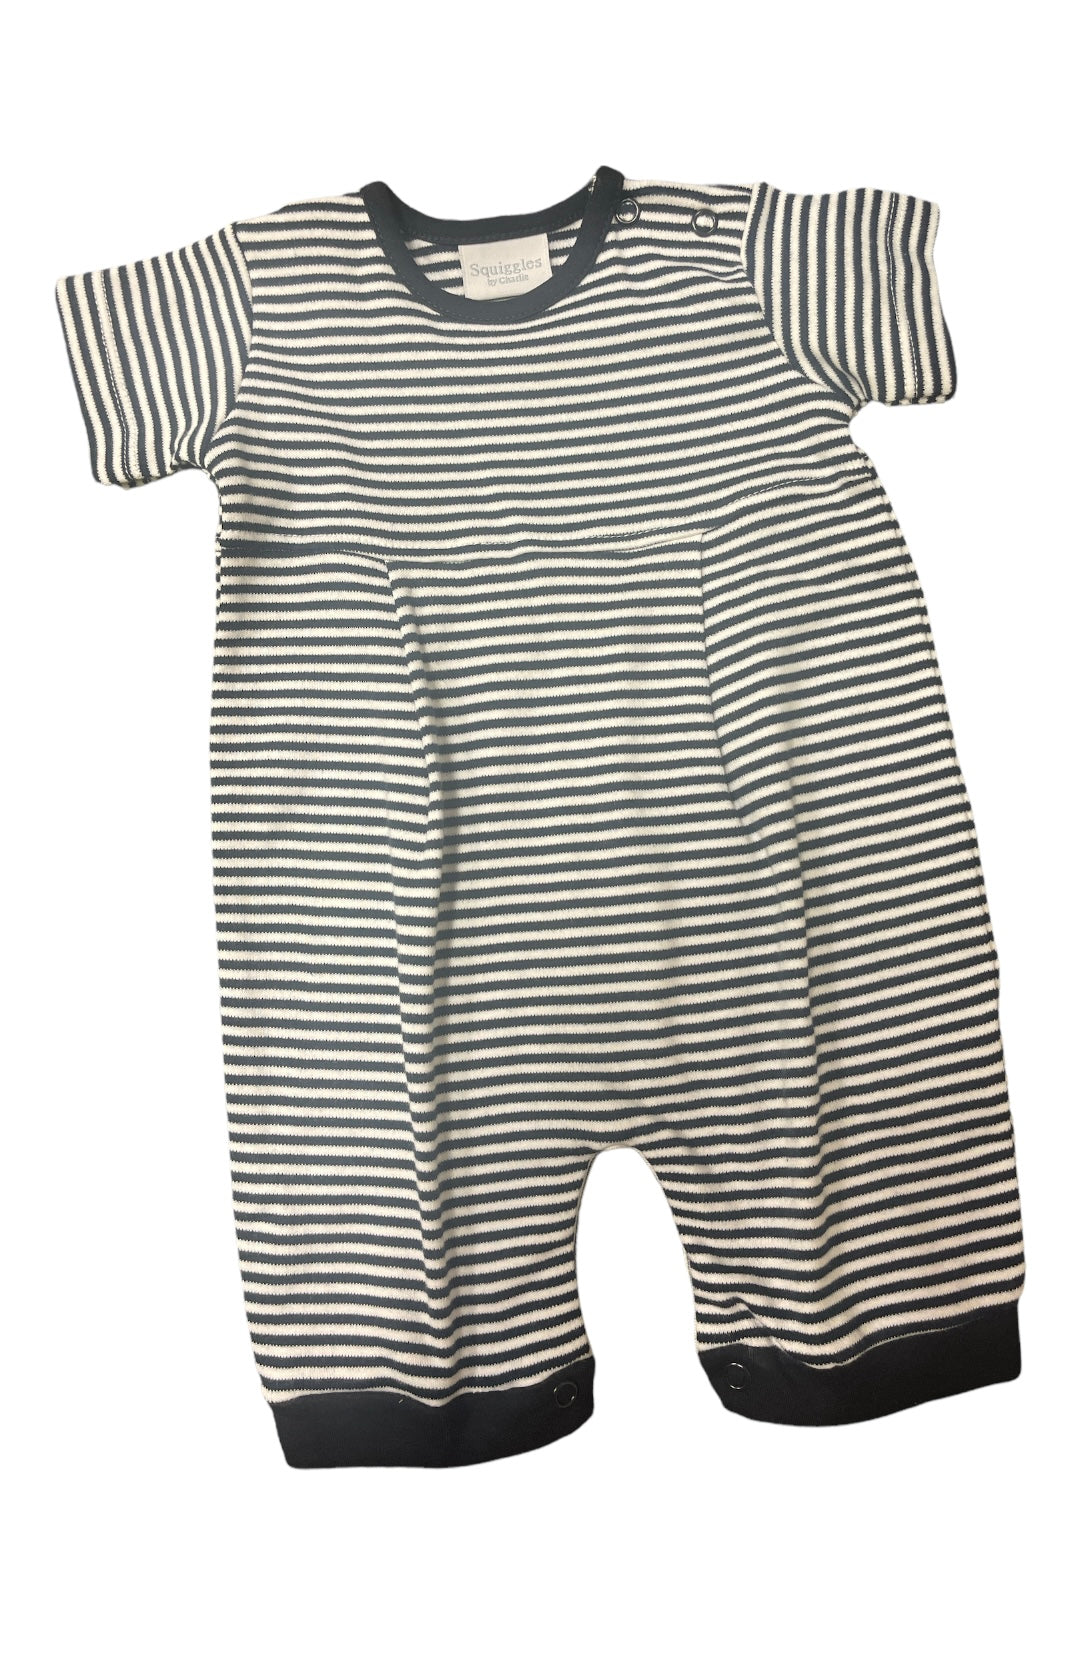 Boys Navy Striped Romper by *Squiggles*